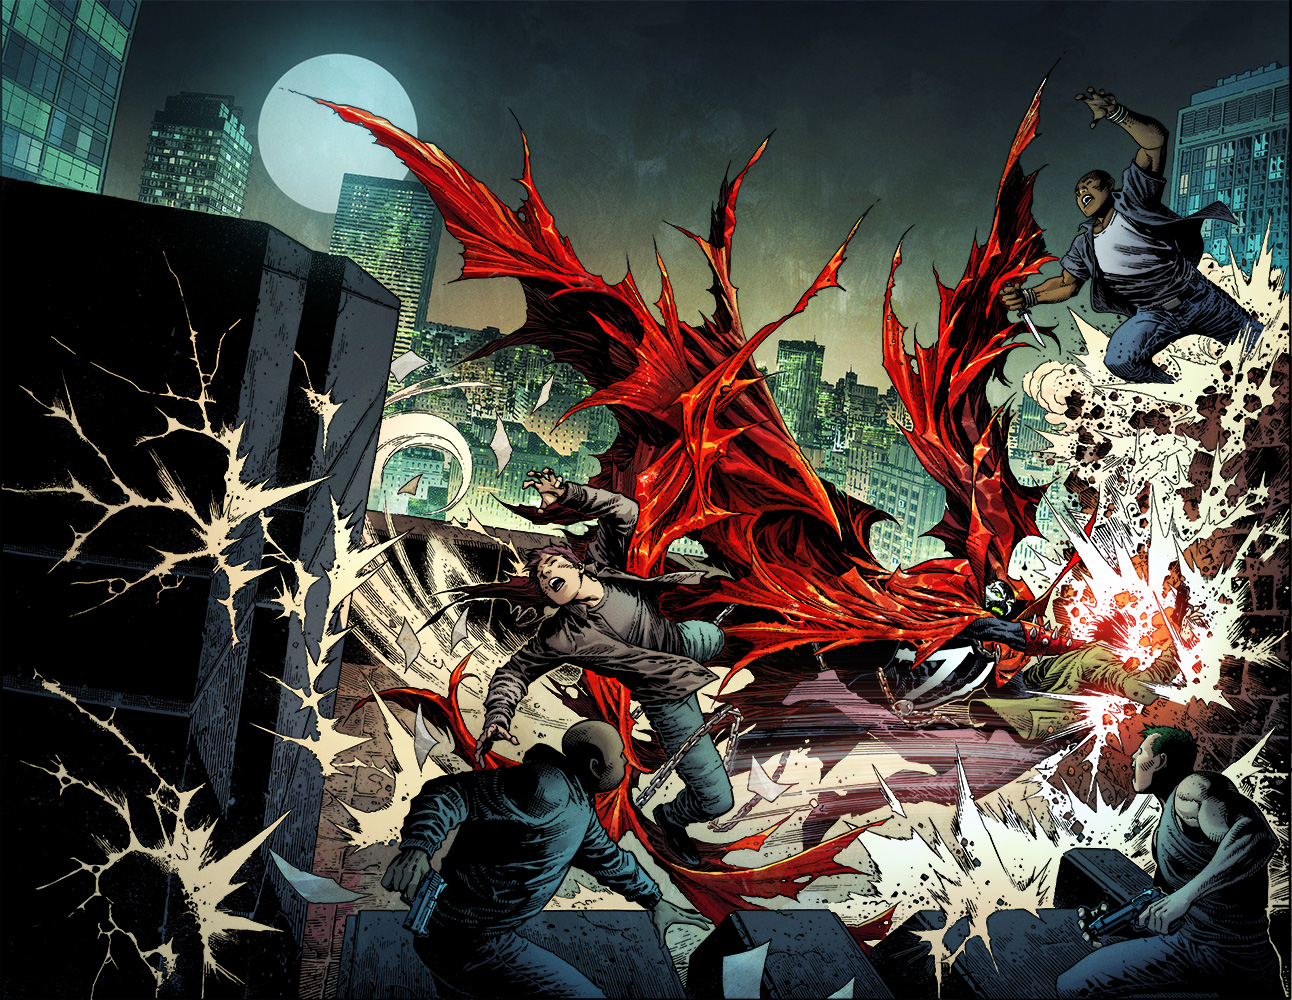 The universe of Spawn